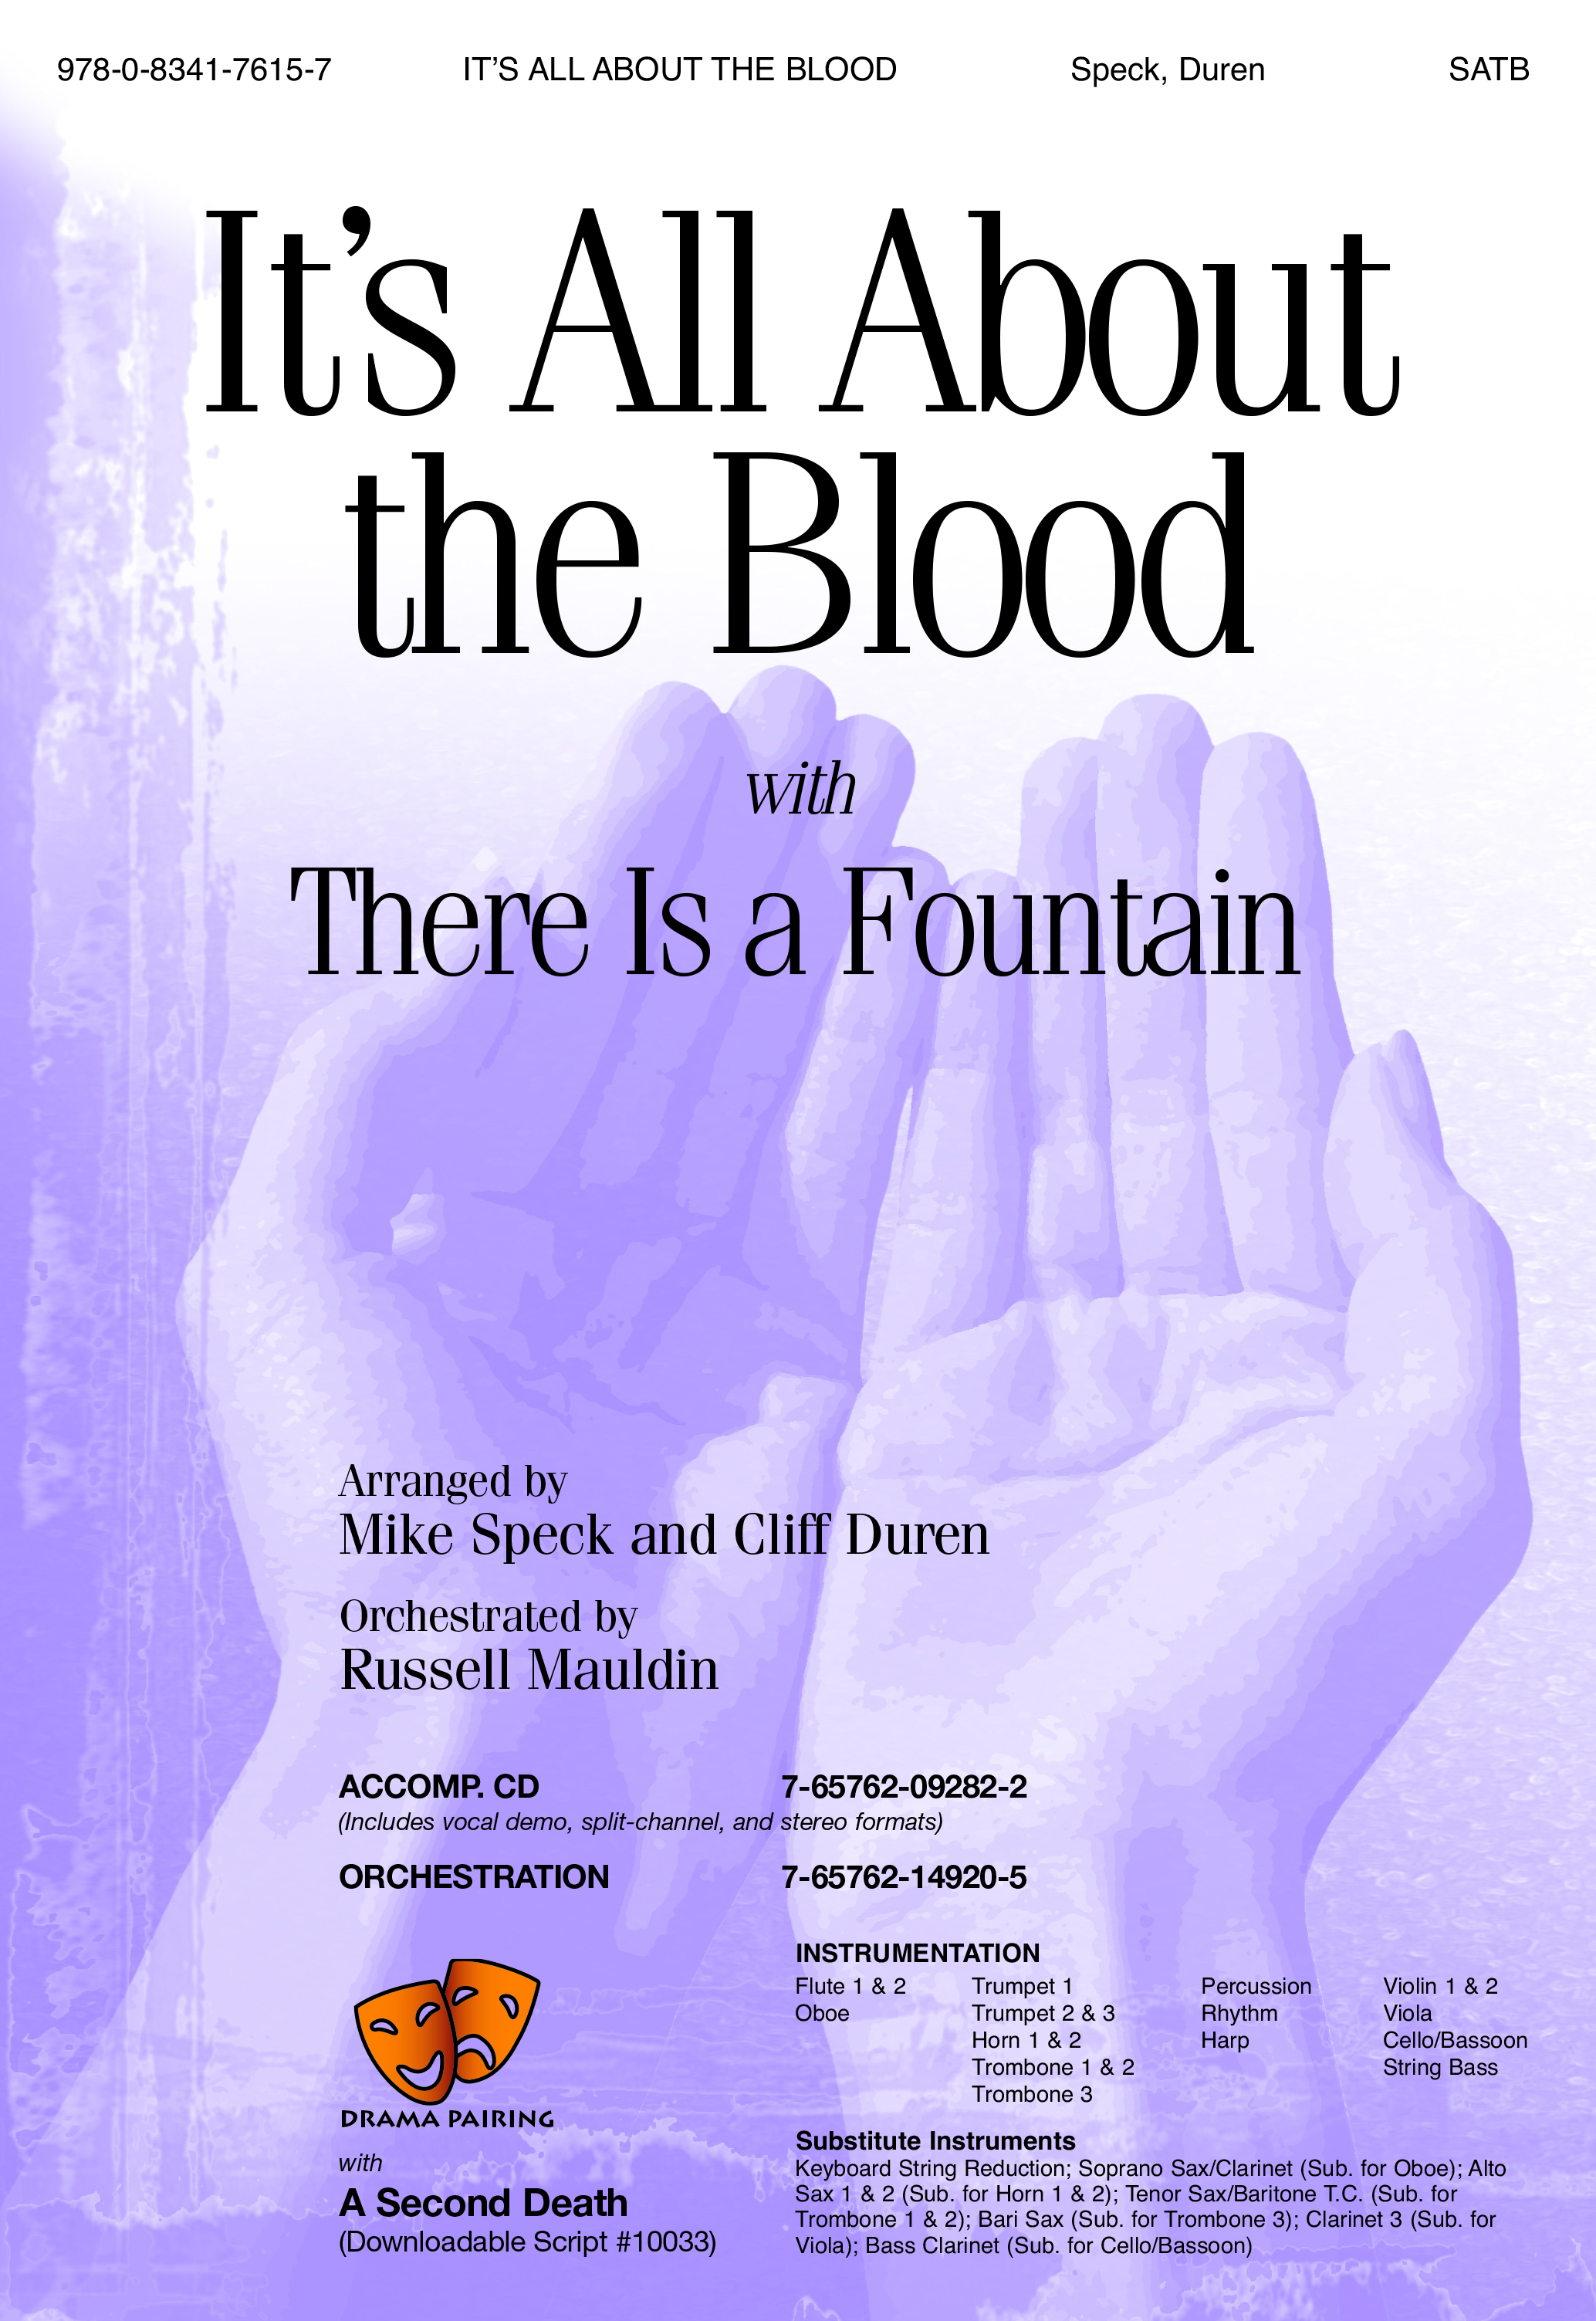 It's All About the Blood with There Is a Fountain